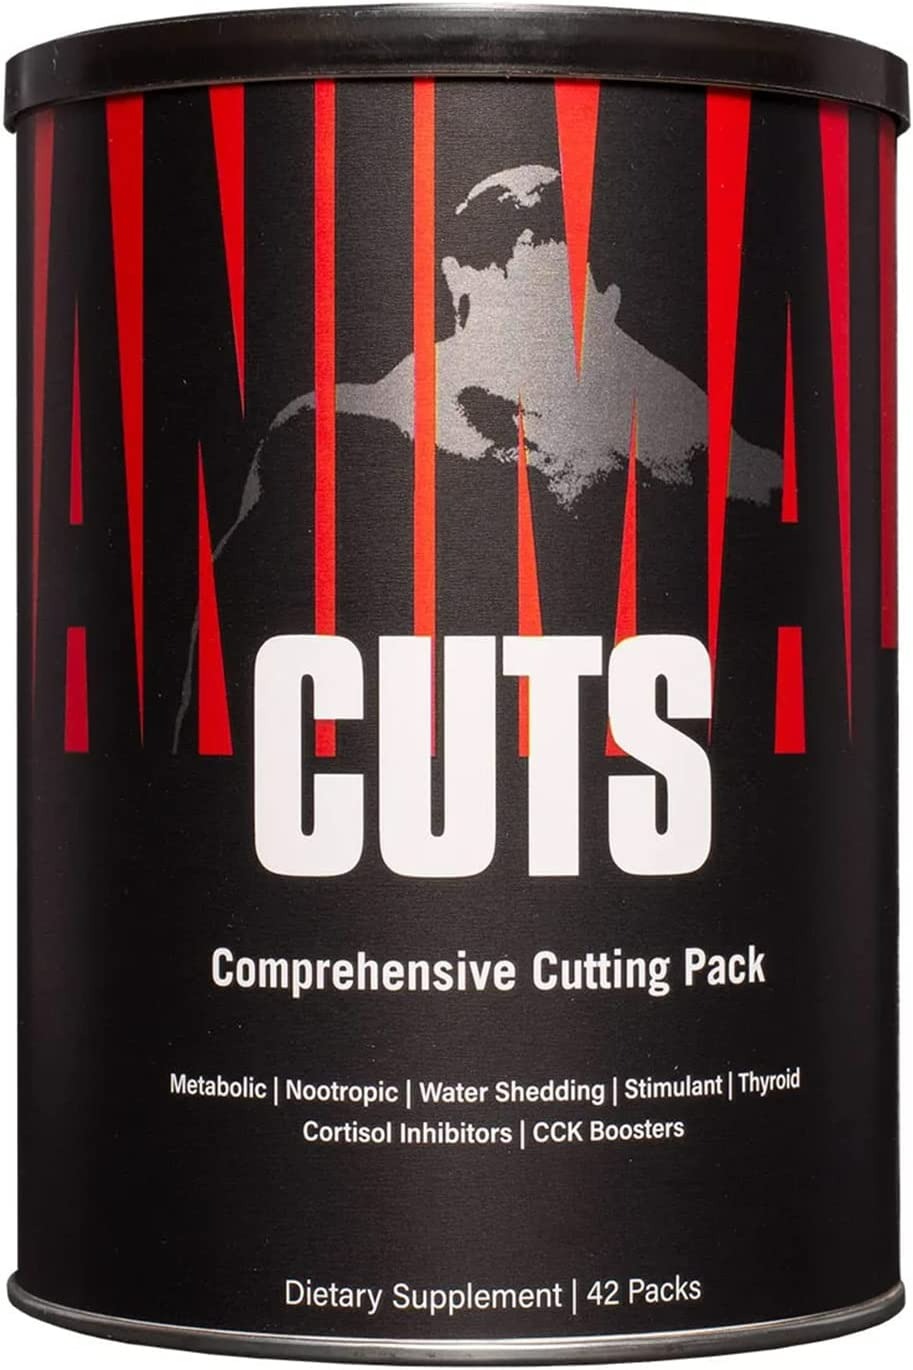 Animal Cuts Thermogenic Fat Burner - Nootropic Weight Loss Management Diet Pills